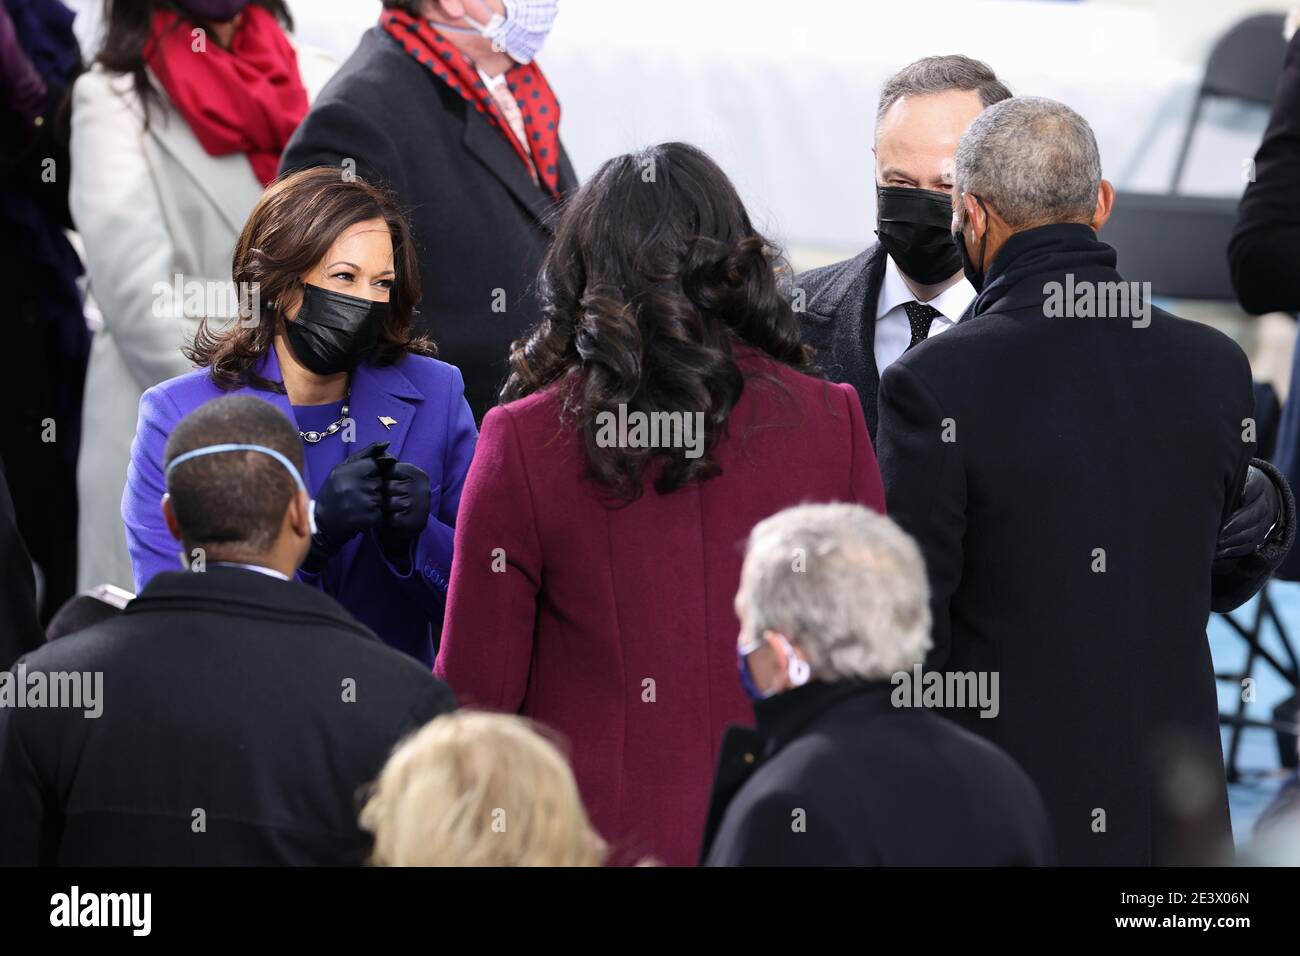 Washington, USA. 20th Jan, 2021.Doug Emhoff and Vice President-elect Kamala Harris speak with First Lady Michelle Obama and President Barack Obama during the Inauguration Day ceremony of President-Elect Joe Biden and Vice President-Elect Kamala Harris held at the U.S. Capitol Building in Washington, D.C. on Jan. 20, 2021. President-elect Joe Biden becomes the 46th President of the United States at noon on Inauguration Day. (Photo by Oliver Contreras/Sipa USA) Stock Photo